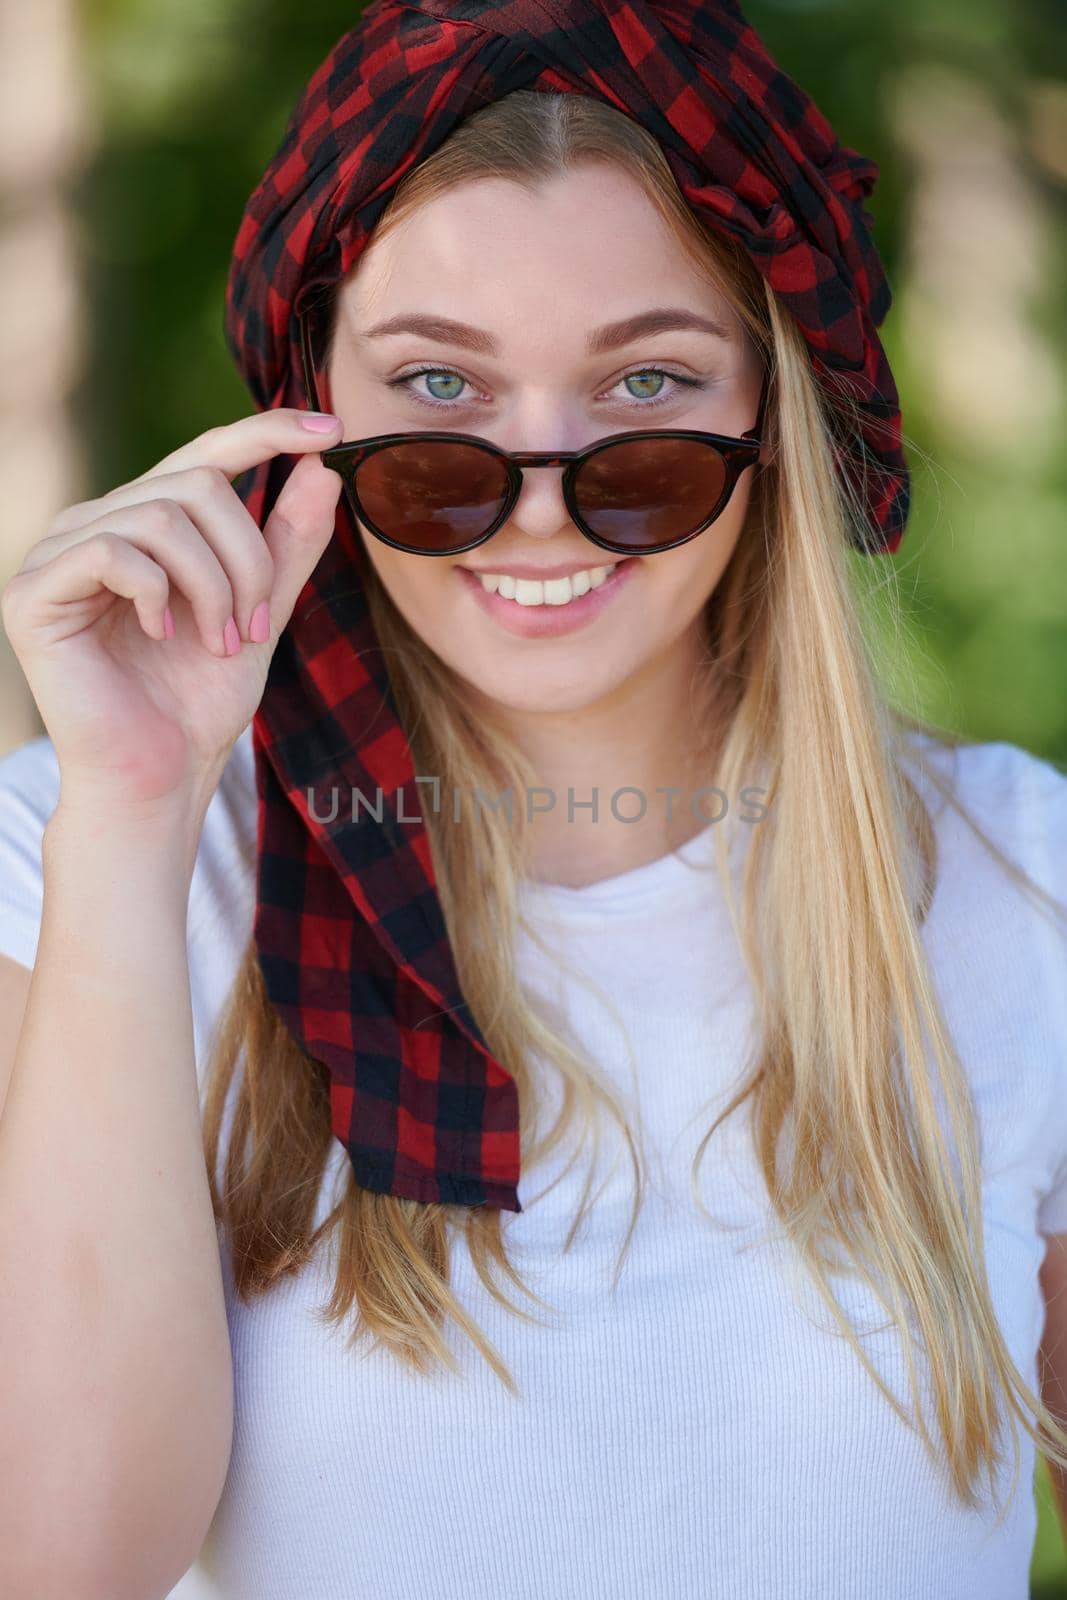 Outdoor portrait of beautiful, emotional, young woman in sunglasses. Soft background. Copy space